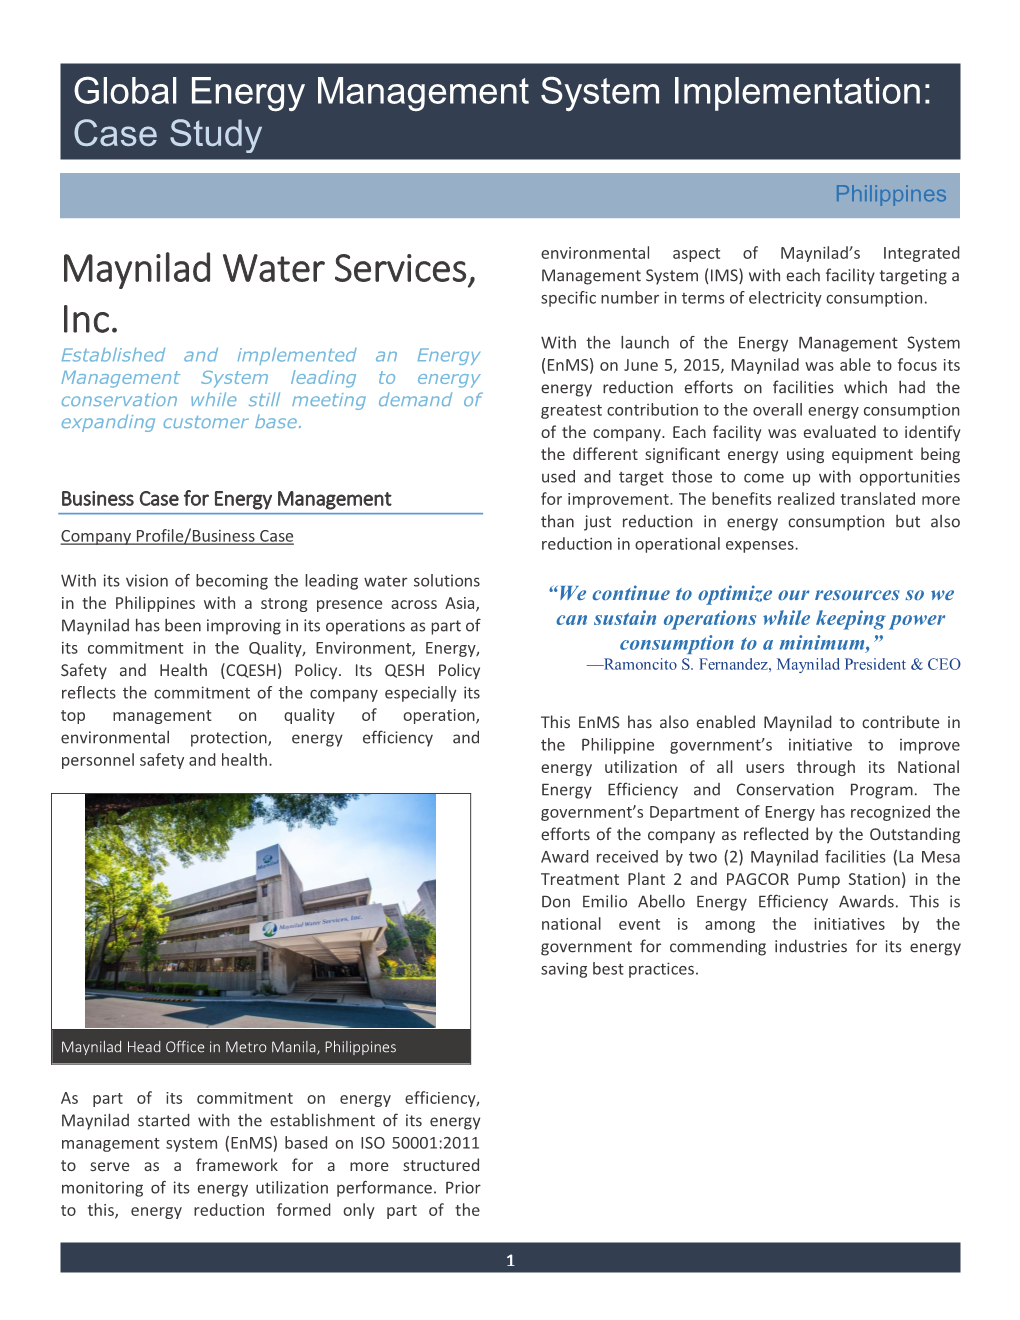 Maynilad Water Services, Inc